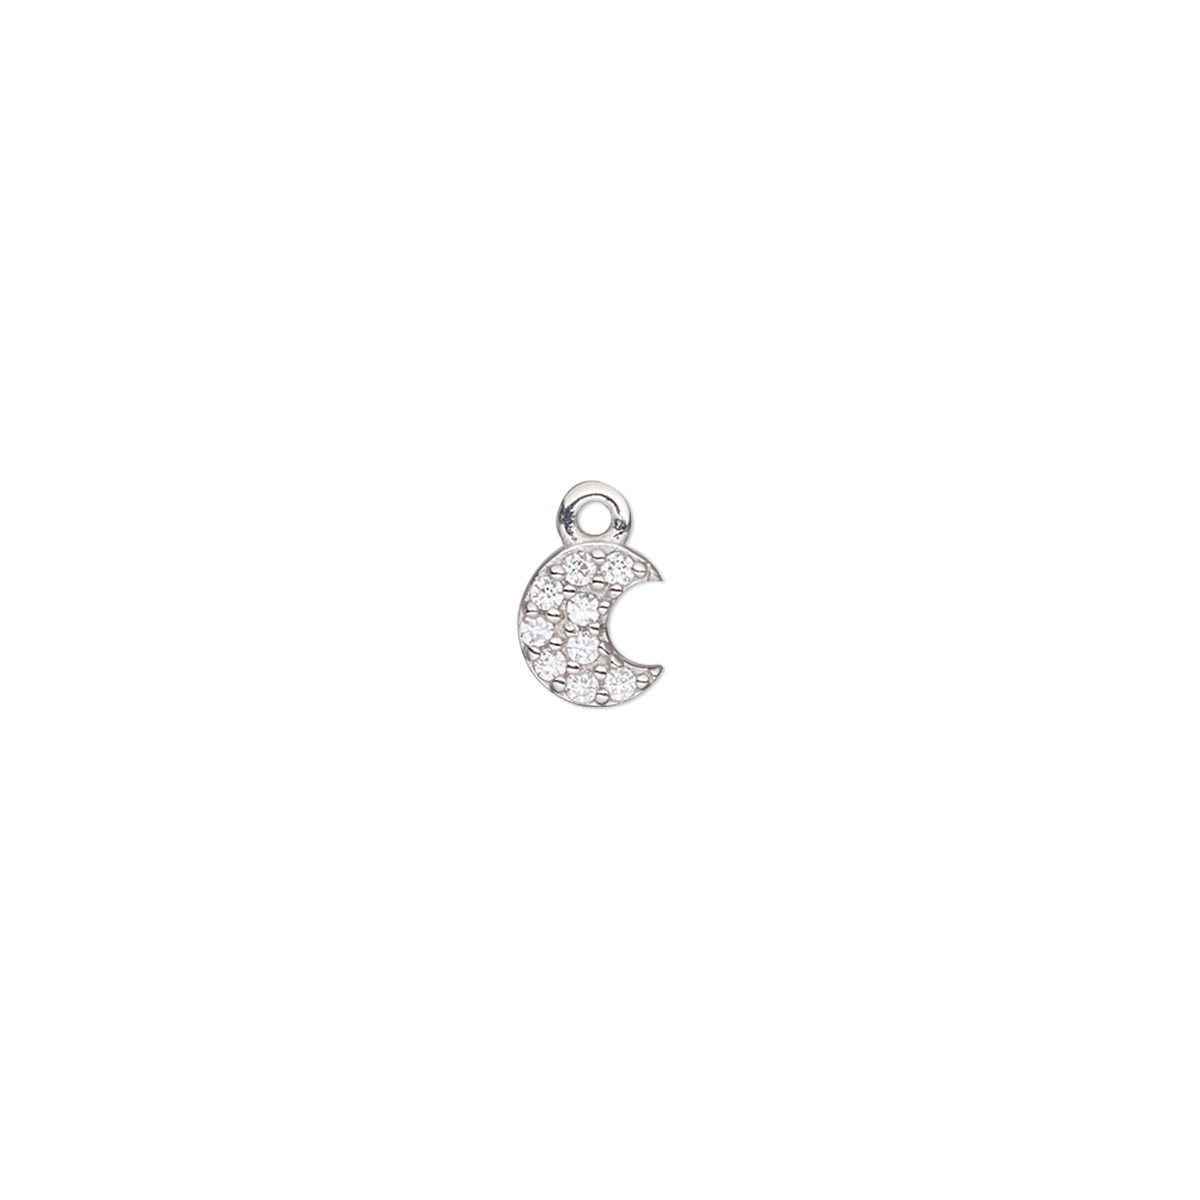 Charm, cubic zirconia and rhodium-plated sterling silver, clear, 6x5mm ...